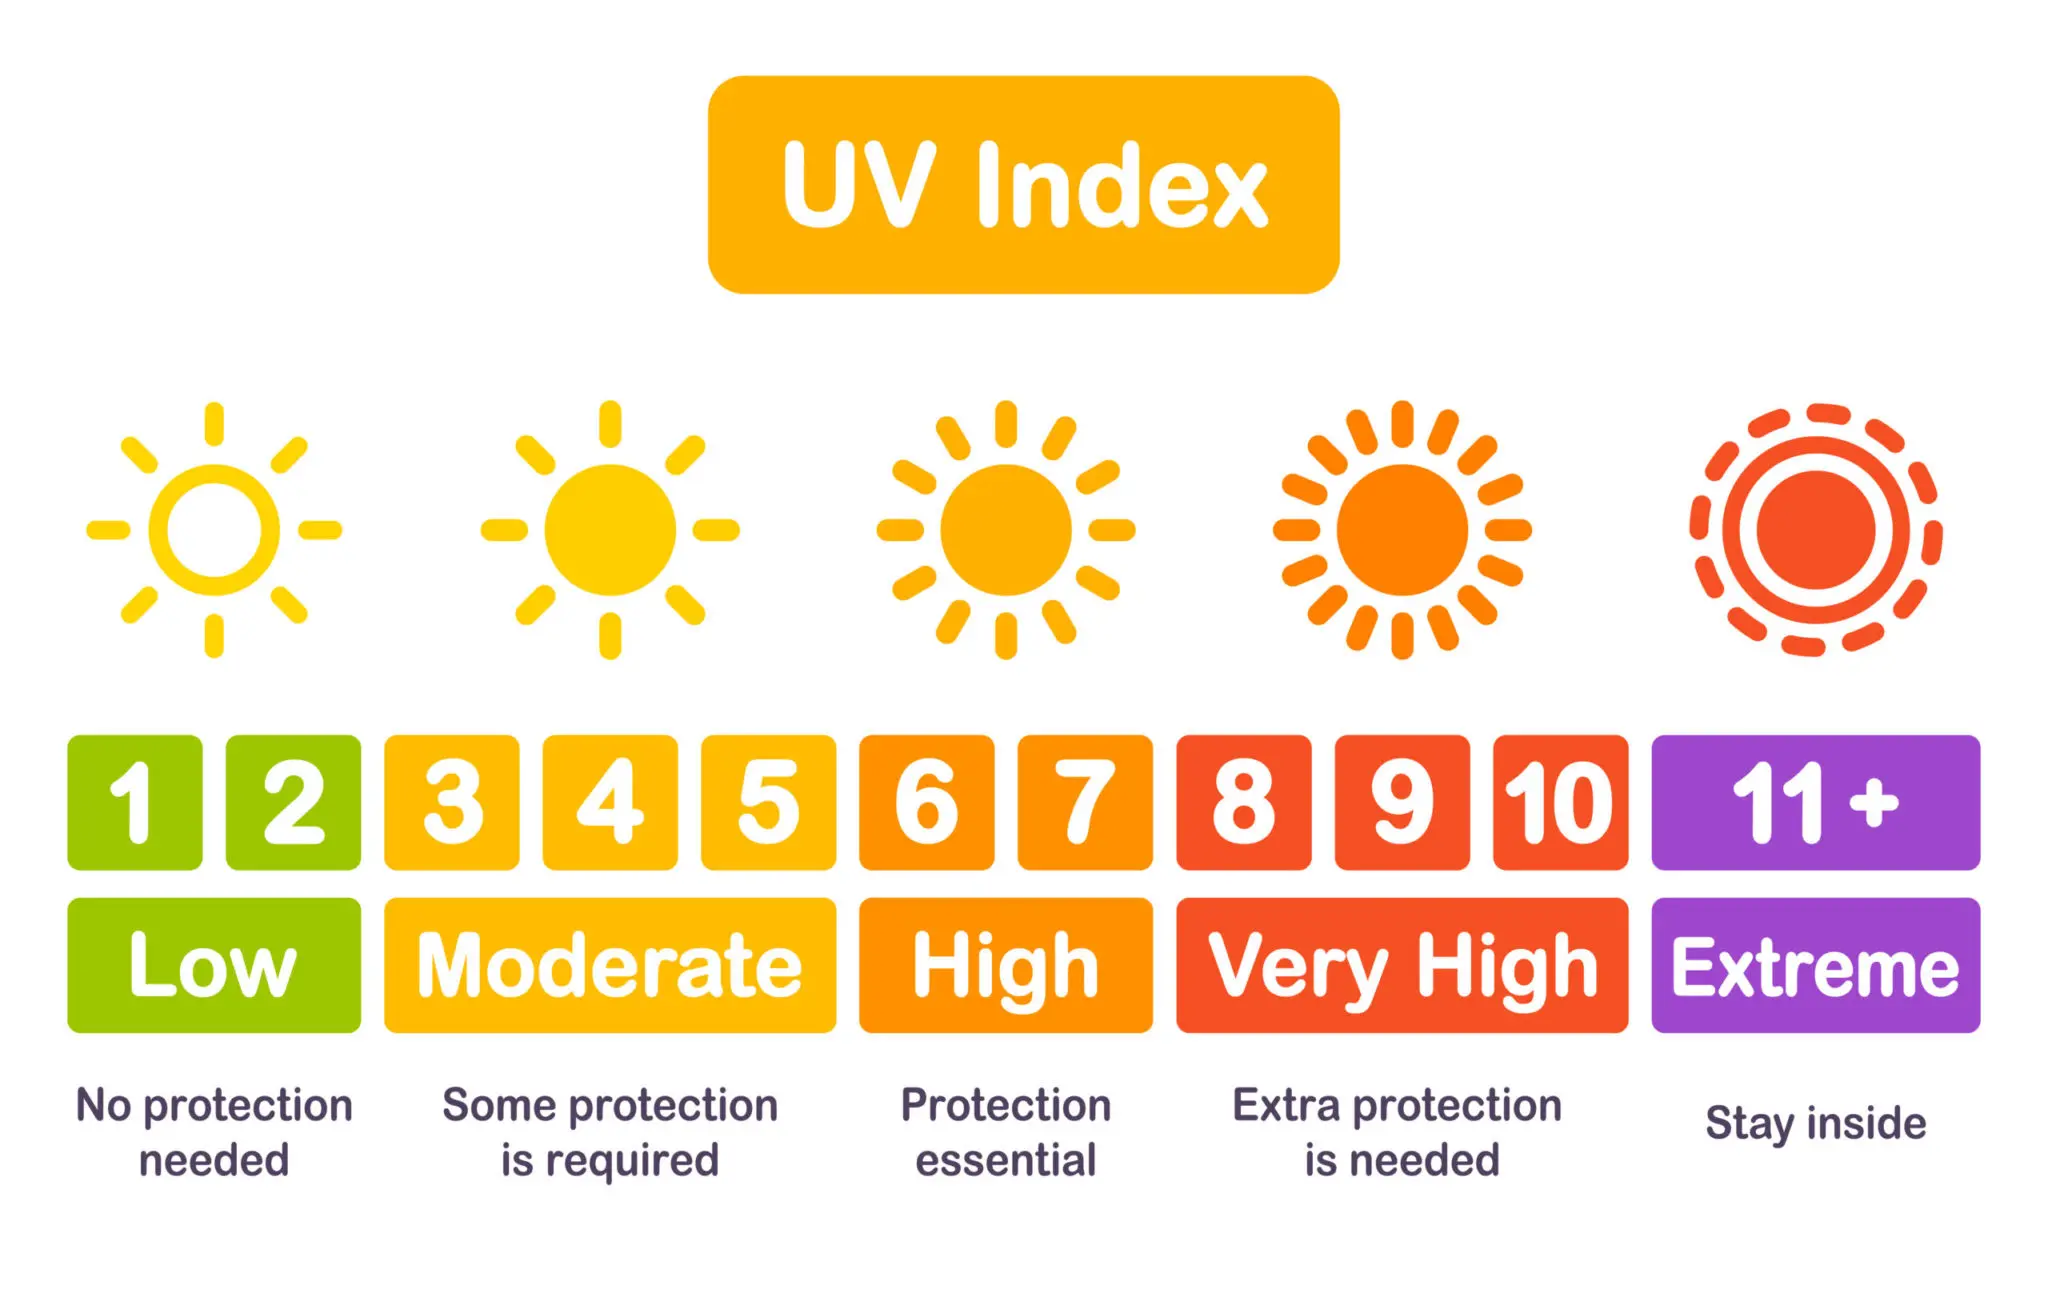 What is a Good Uv to Tan?